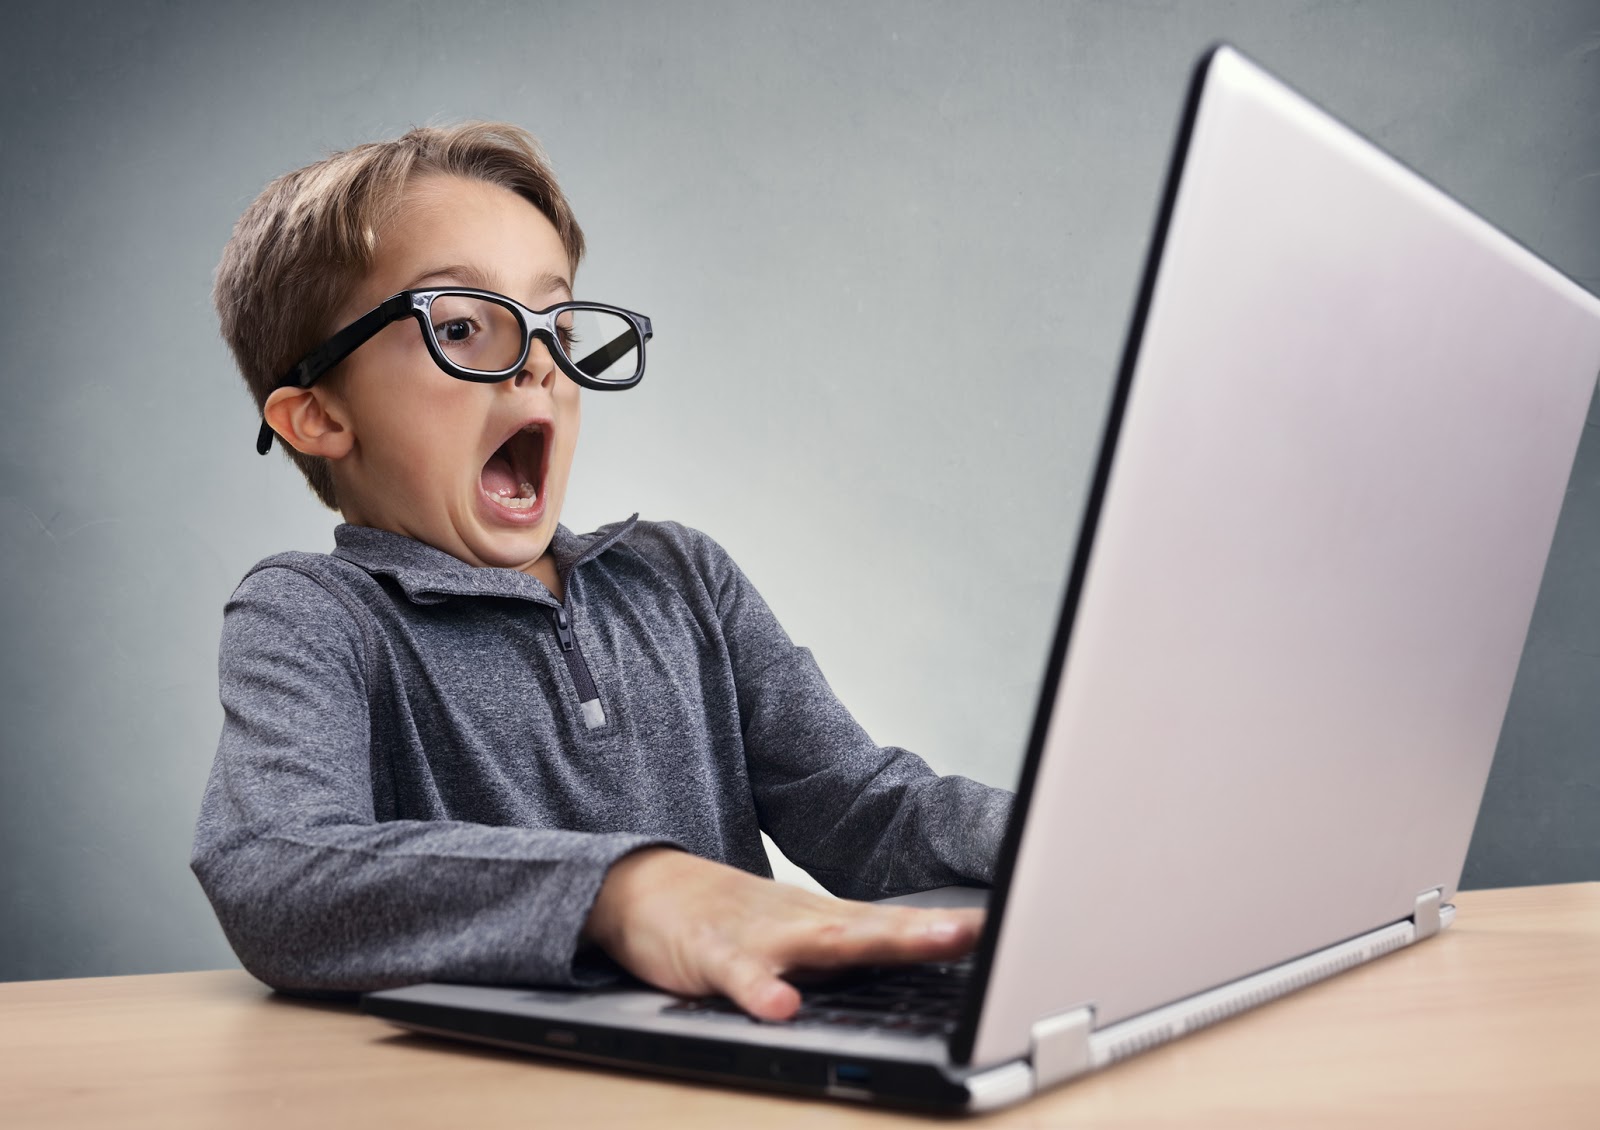 child on laptop scared by what he sees